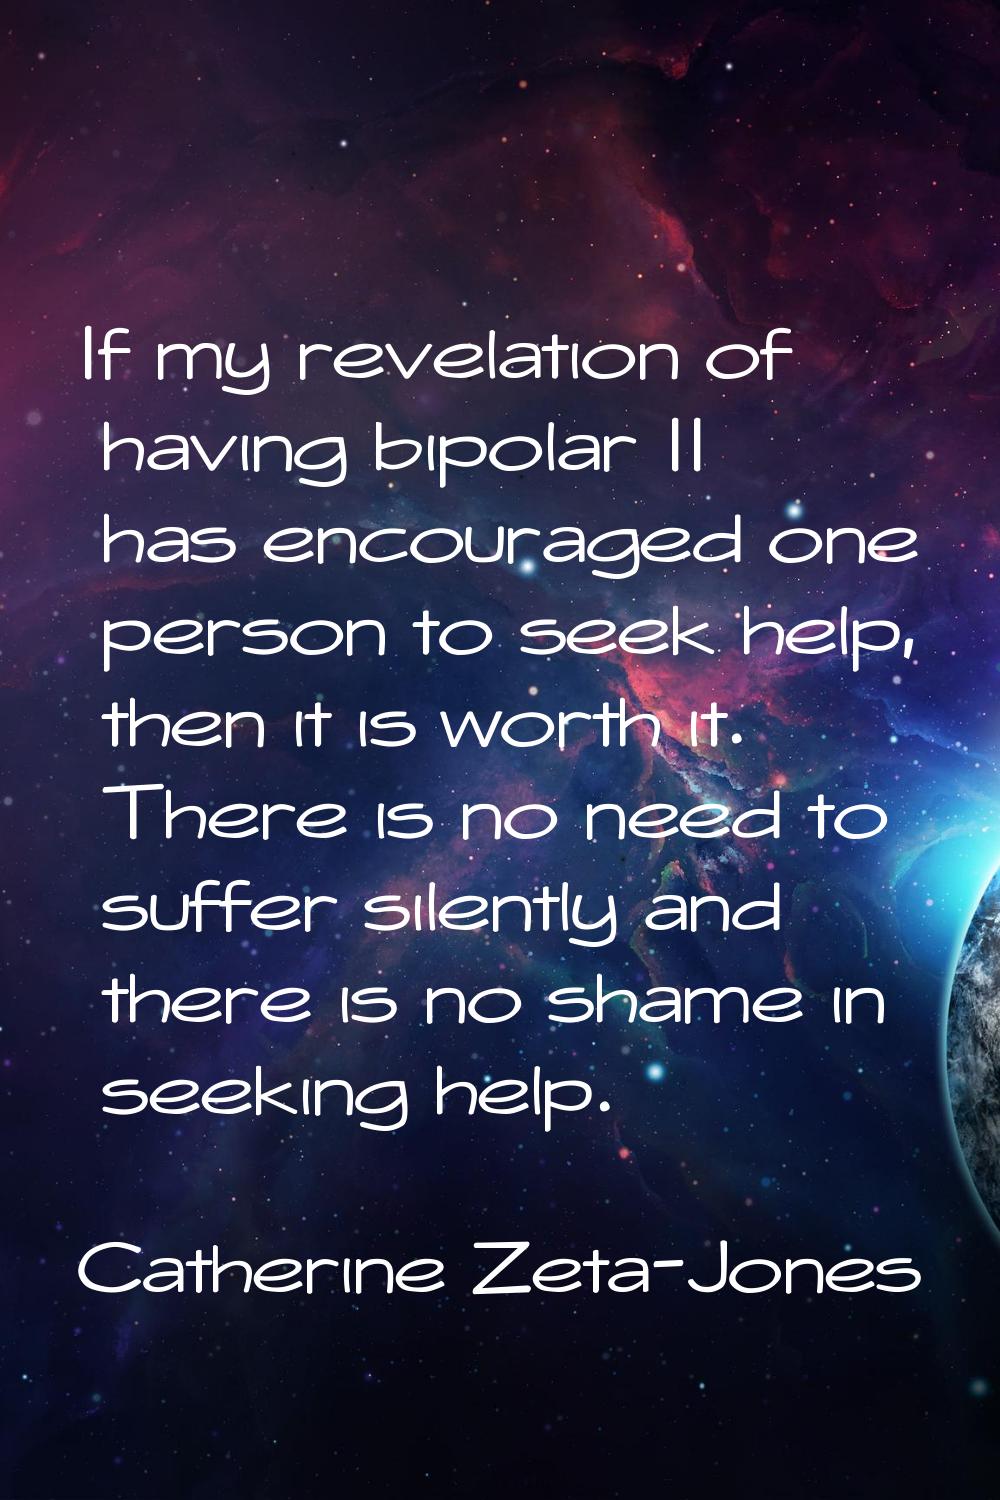 If my revelation of having bipolar II has encouraged one person to seek help, then it is worth it. 